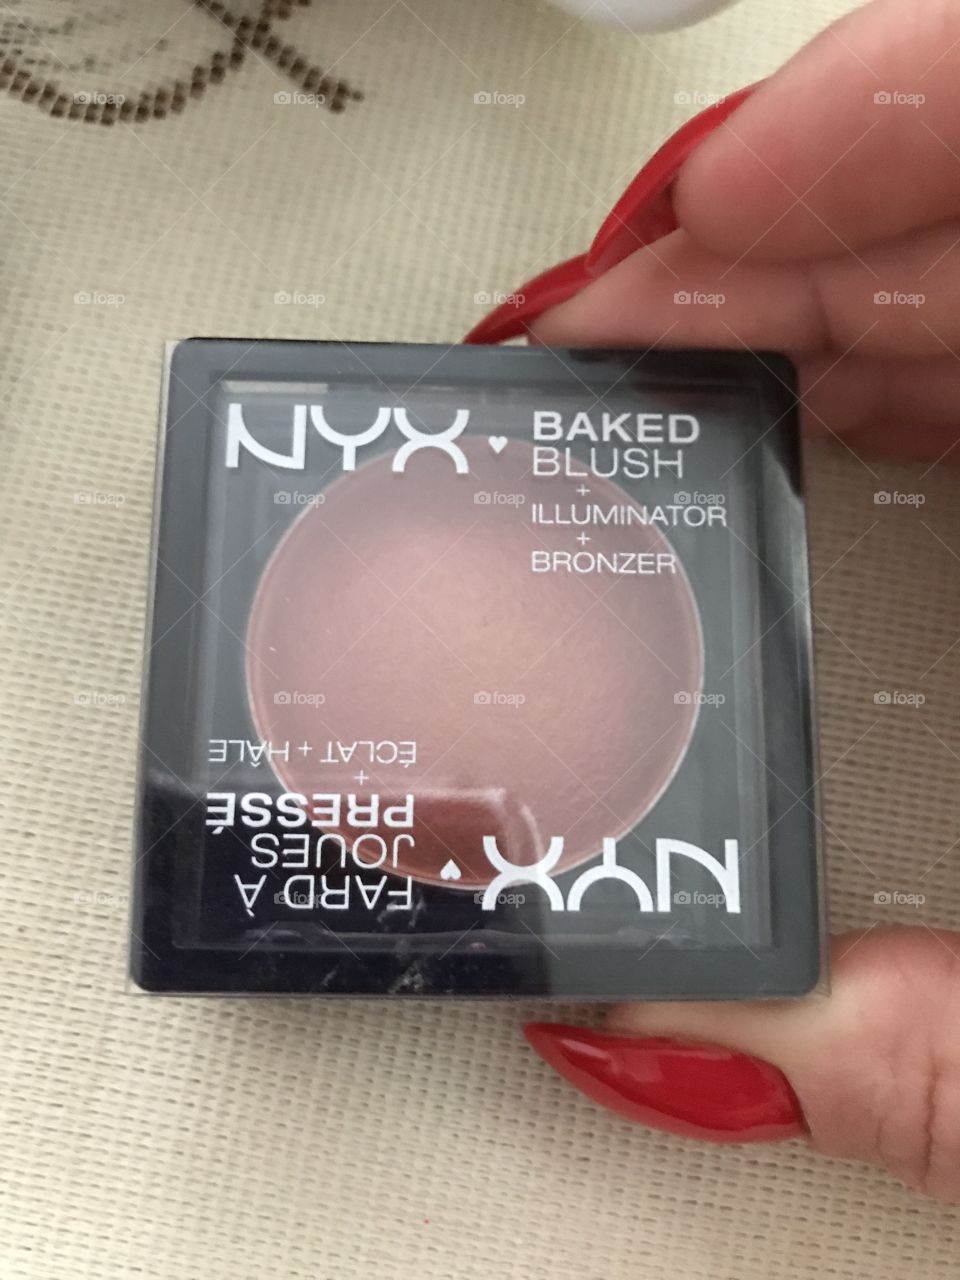 I love NYX cosmetics and more as they are on the promotion ❤️💋😍💄💅🏻